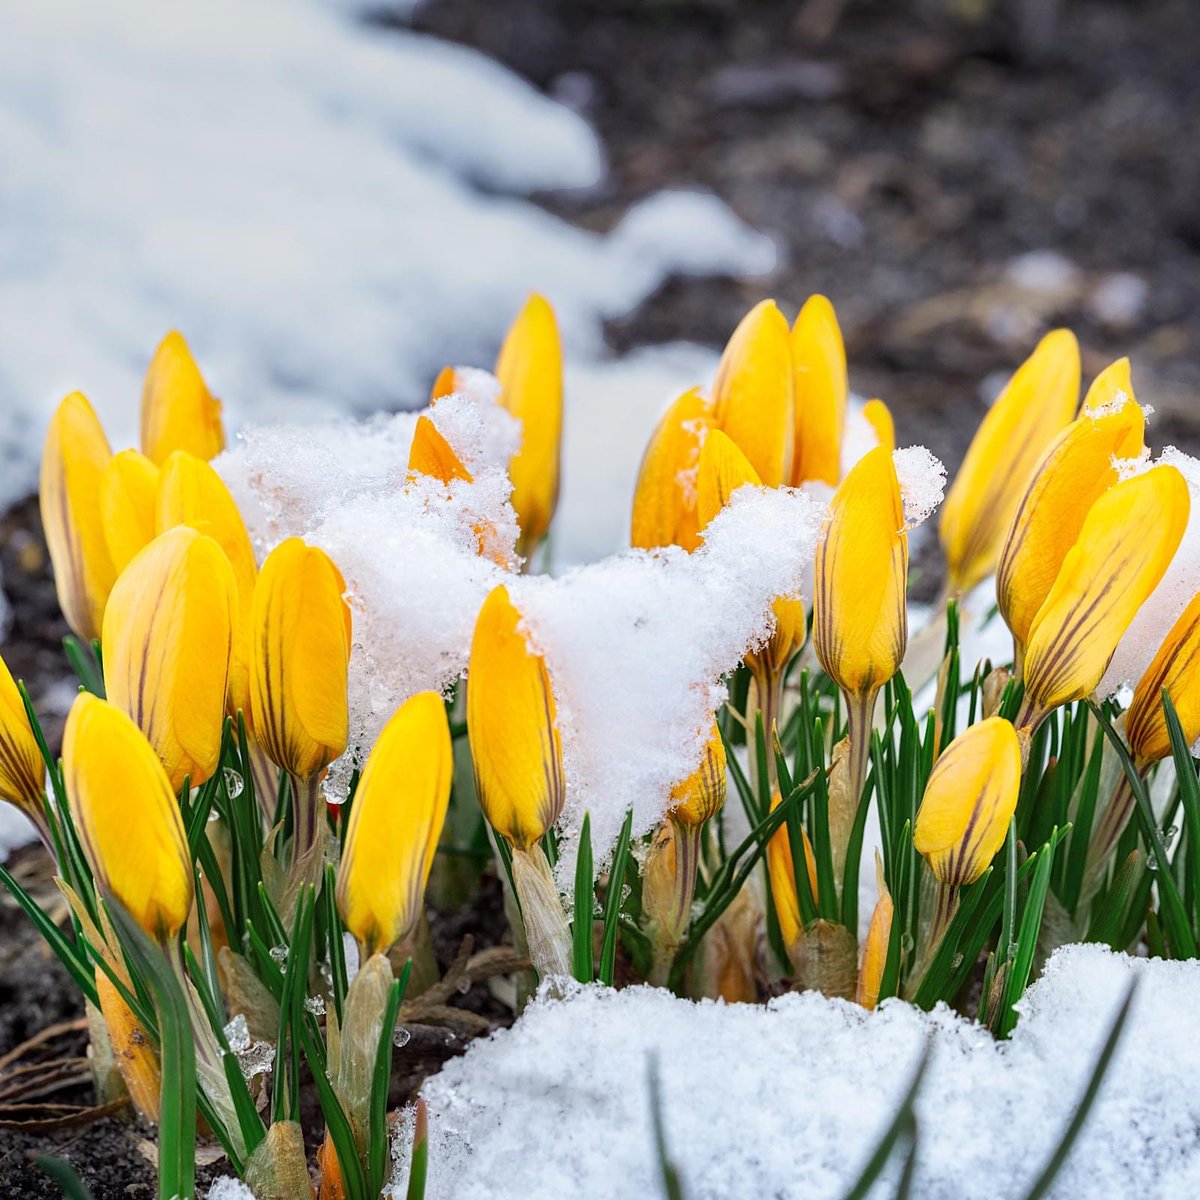 Rejoice! Spring Has Sprung in Ouray, Colorado

Learn more: postly.app/2MUf

#ourayco #twinpeaks #vacation #mountainvacation #twinpeaksouray